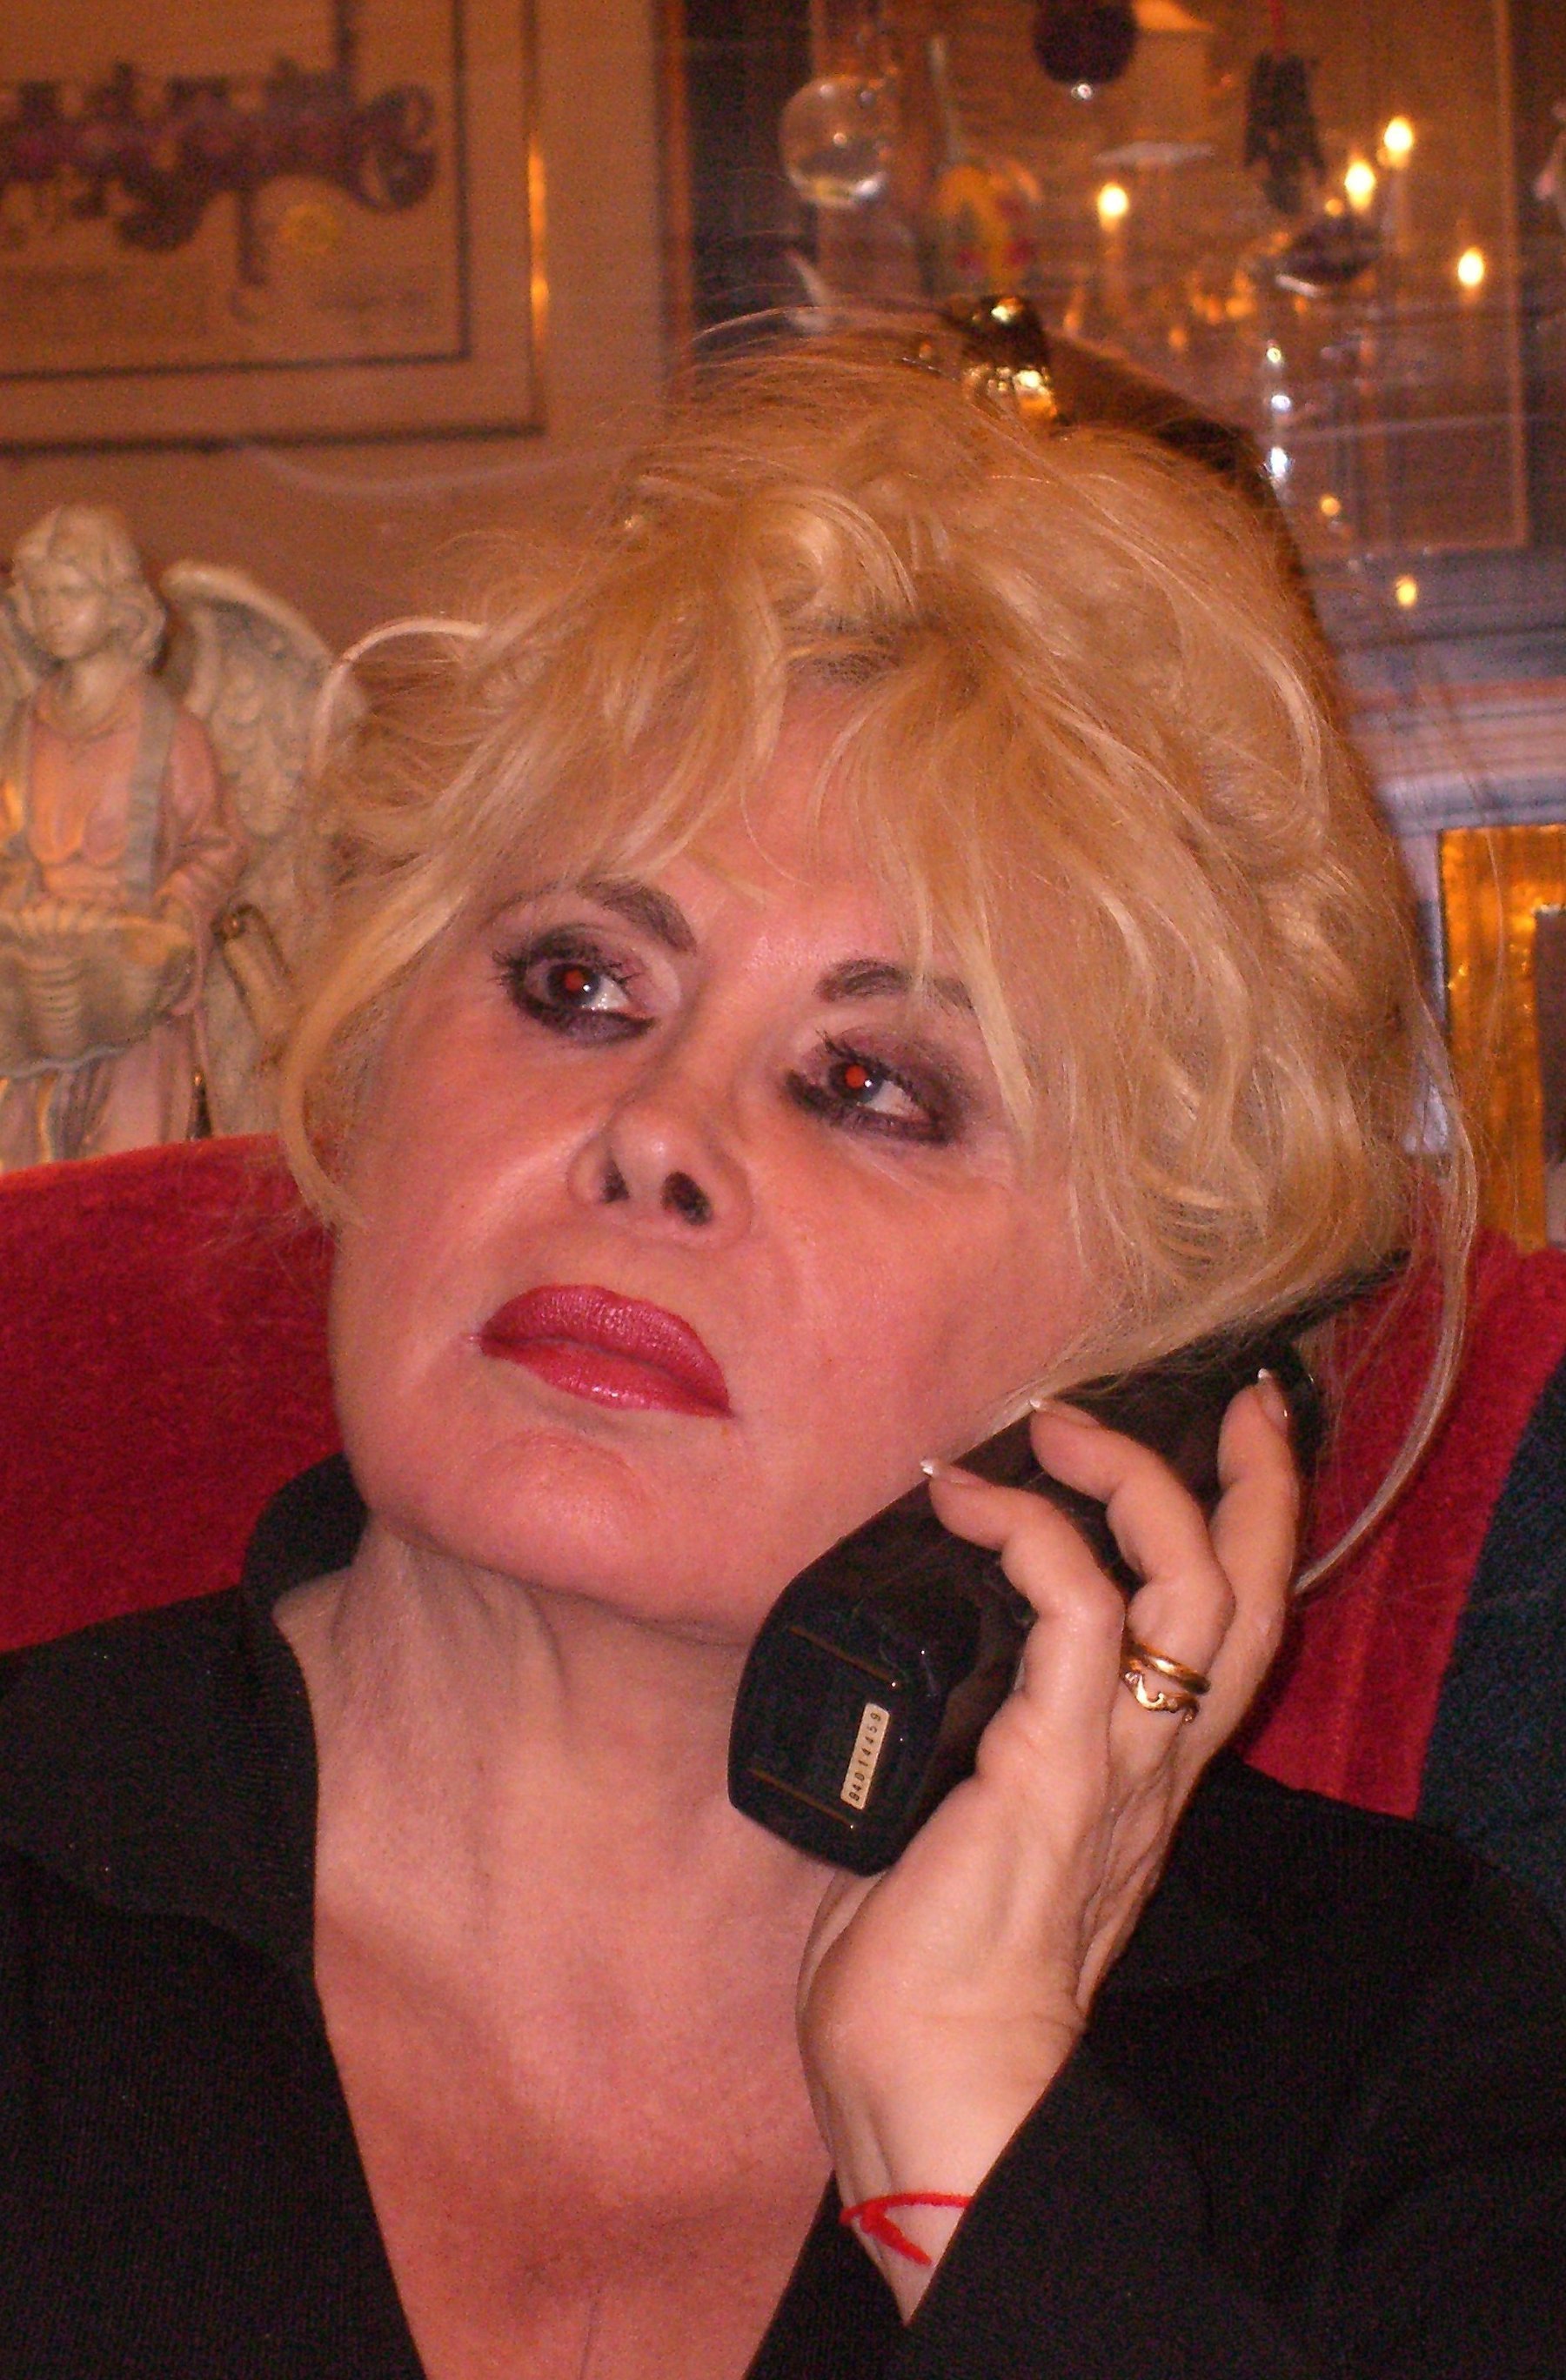 Psychic Readings by Phone